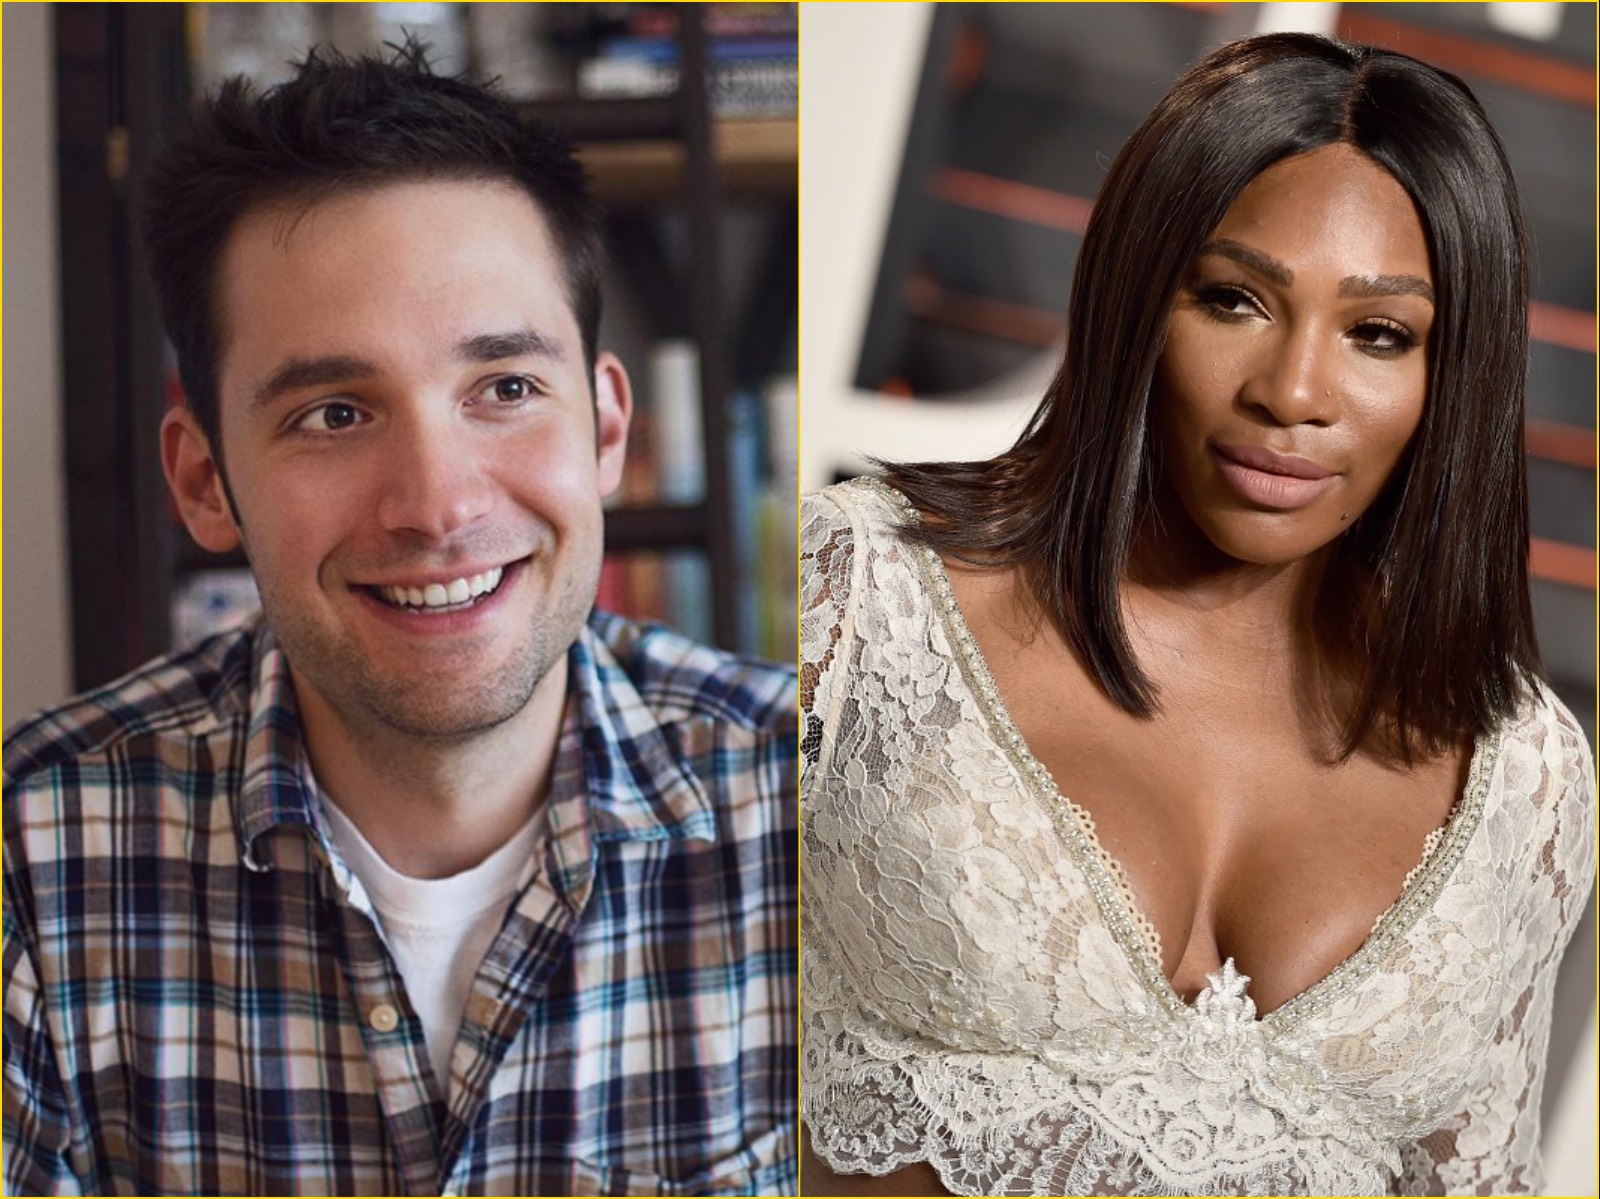 Reddit Co-Founder Alexis Ohanian (right), Tennis Giant Serena Williams